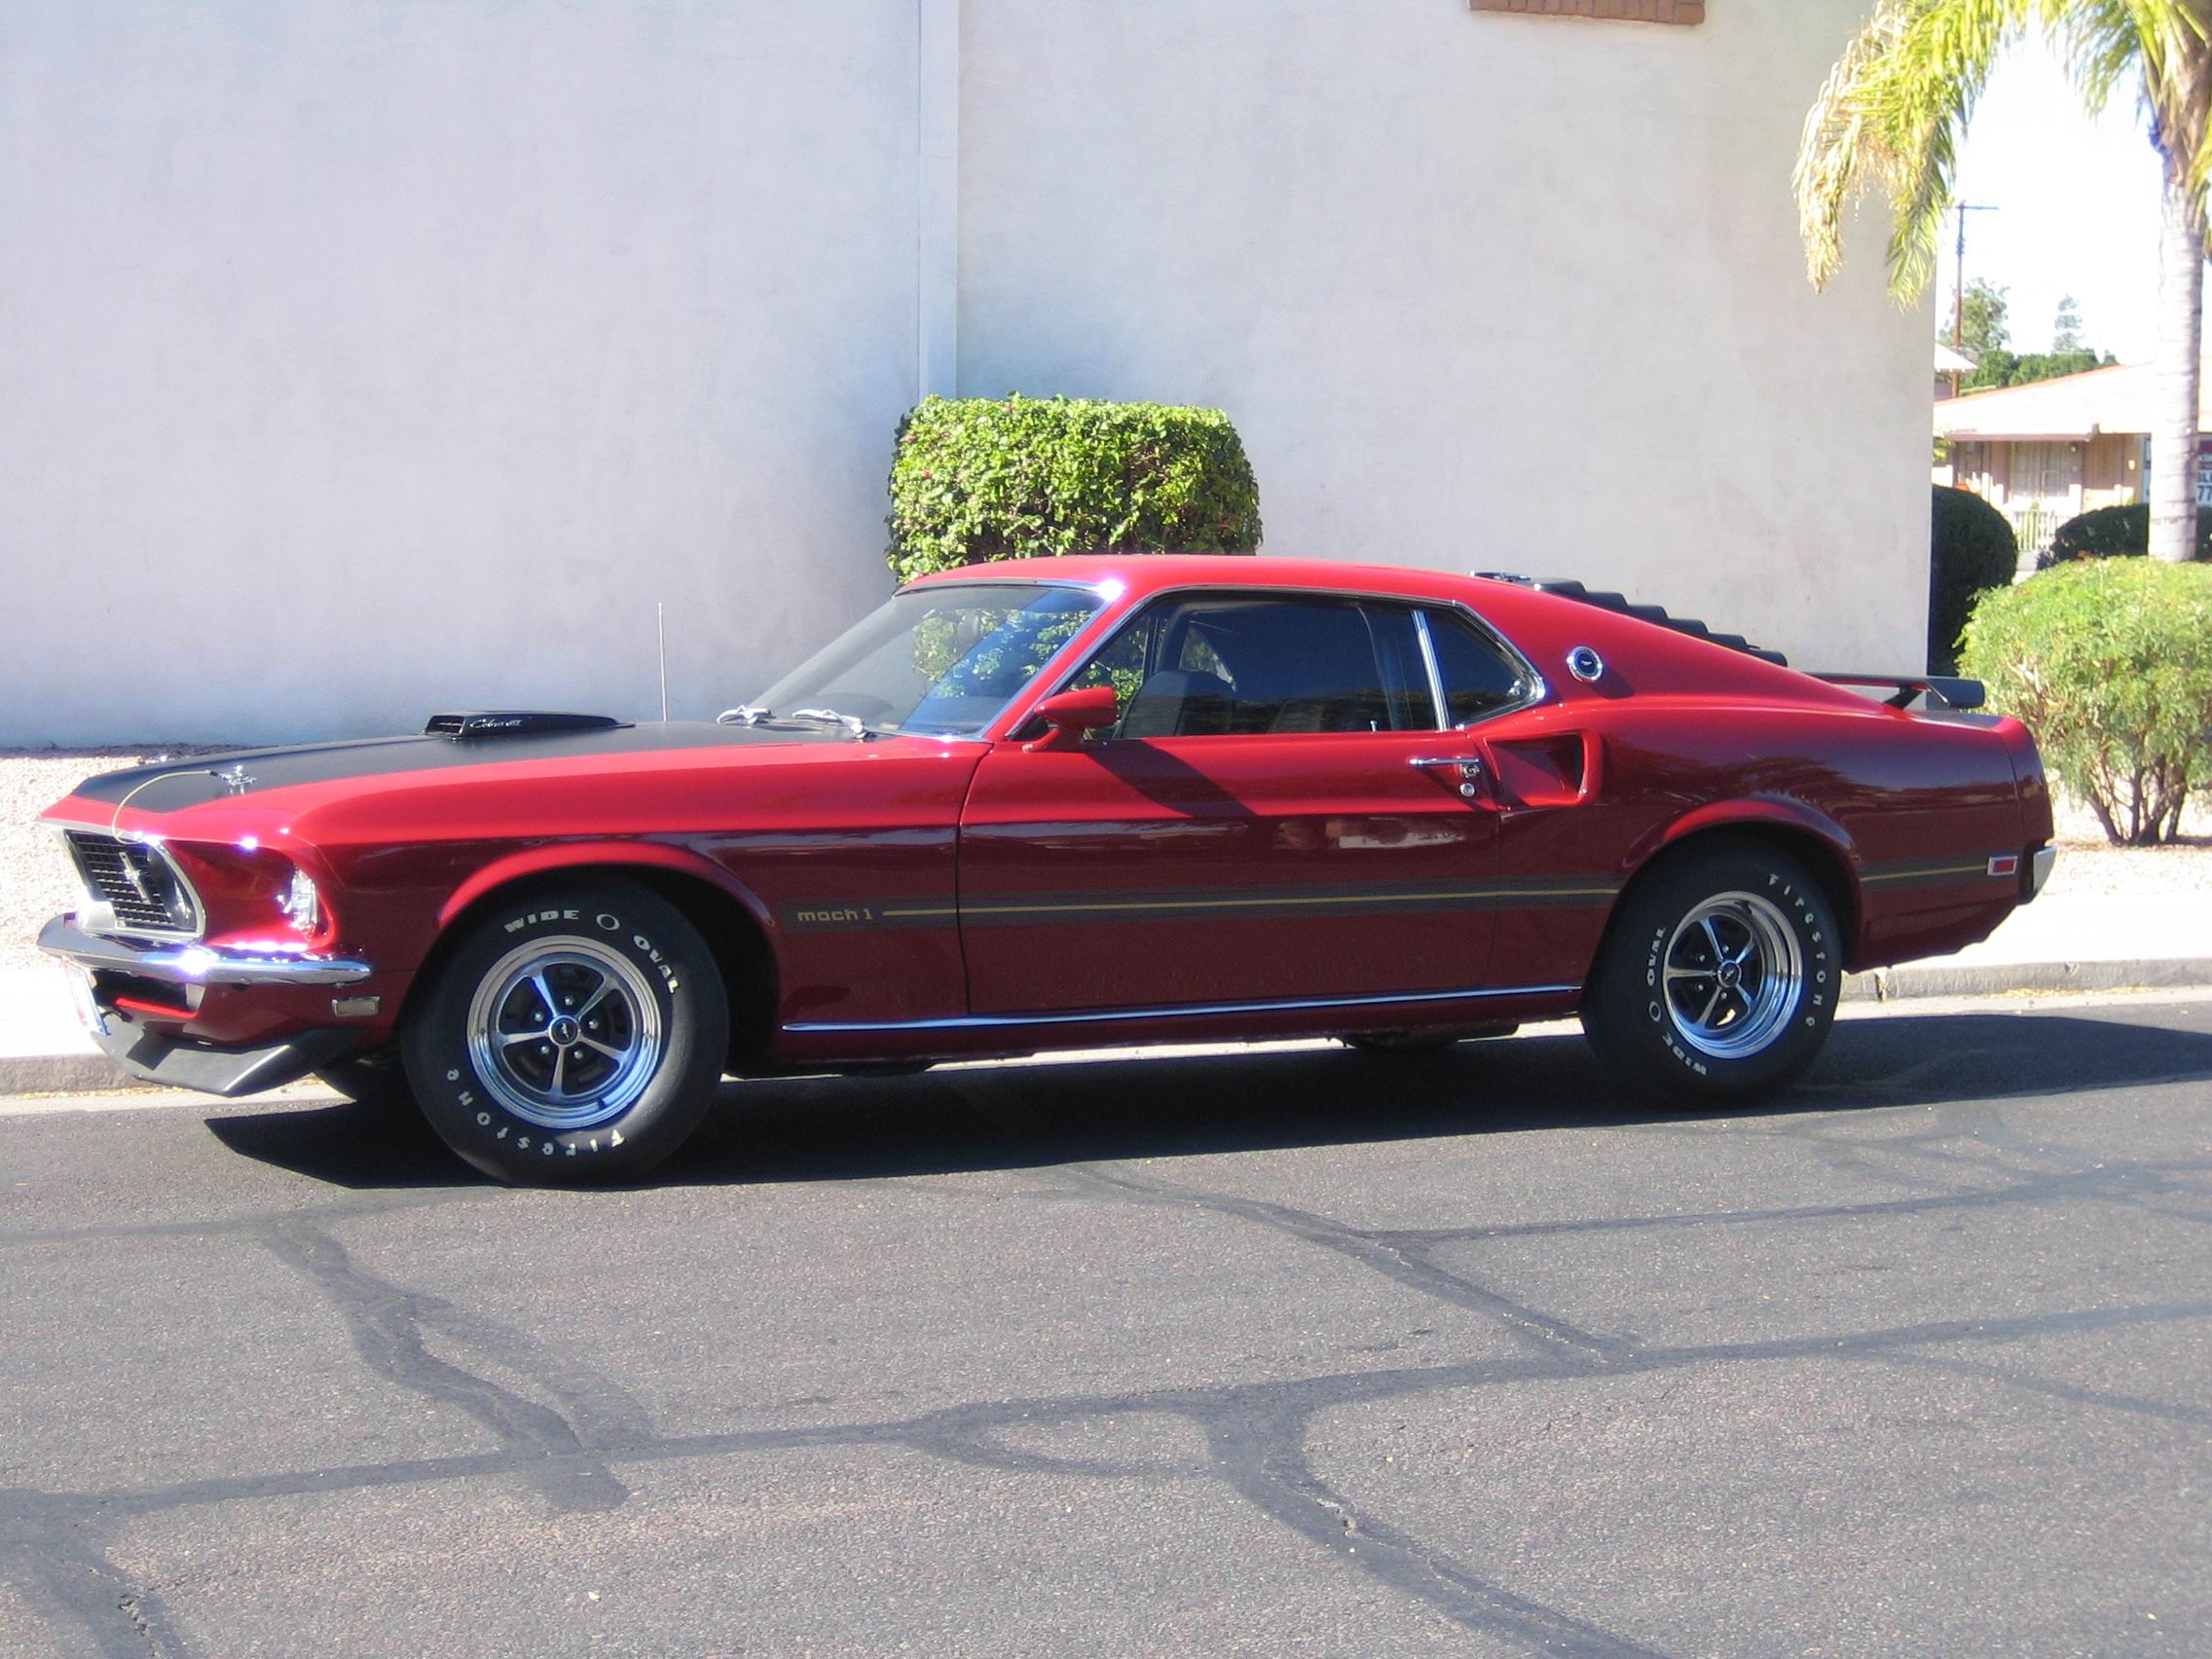 Car Fastback Ford Mustang Mach 1 Muscle Car Red Car 2272x1704